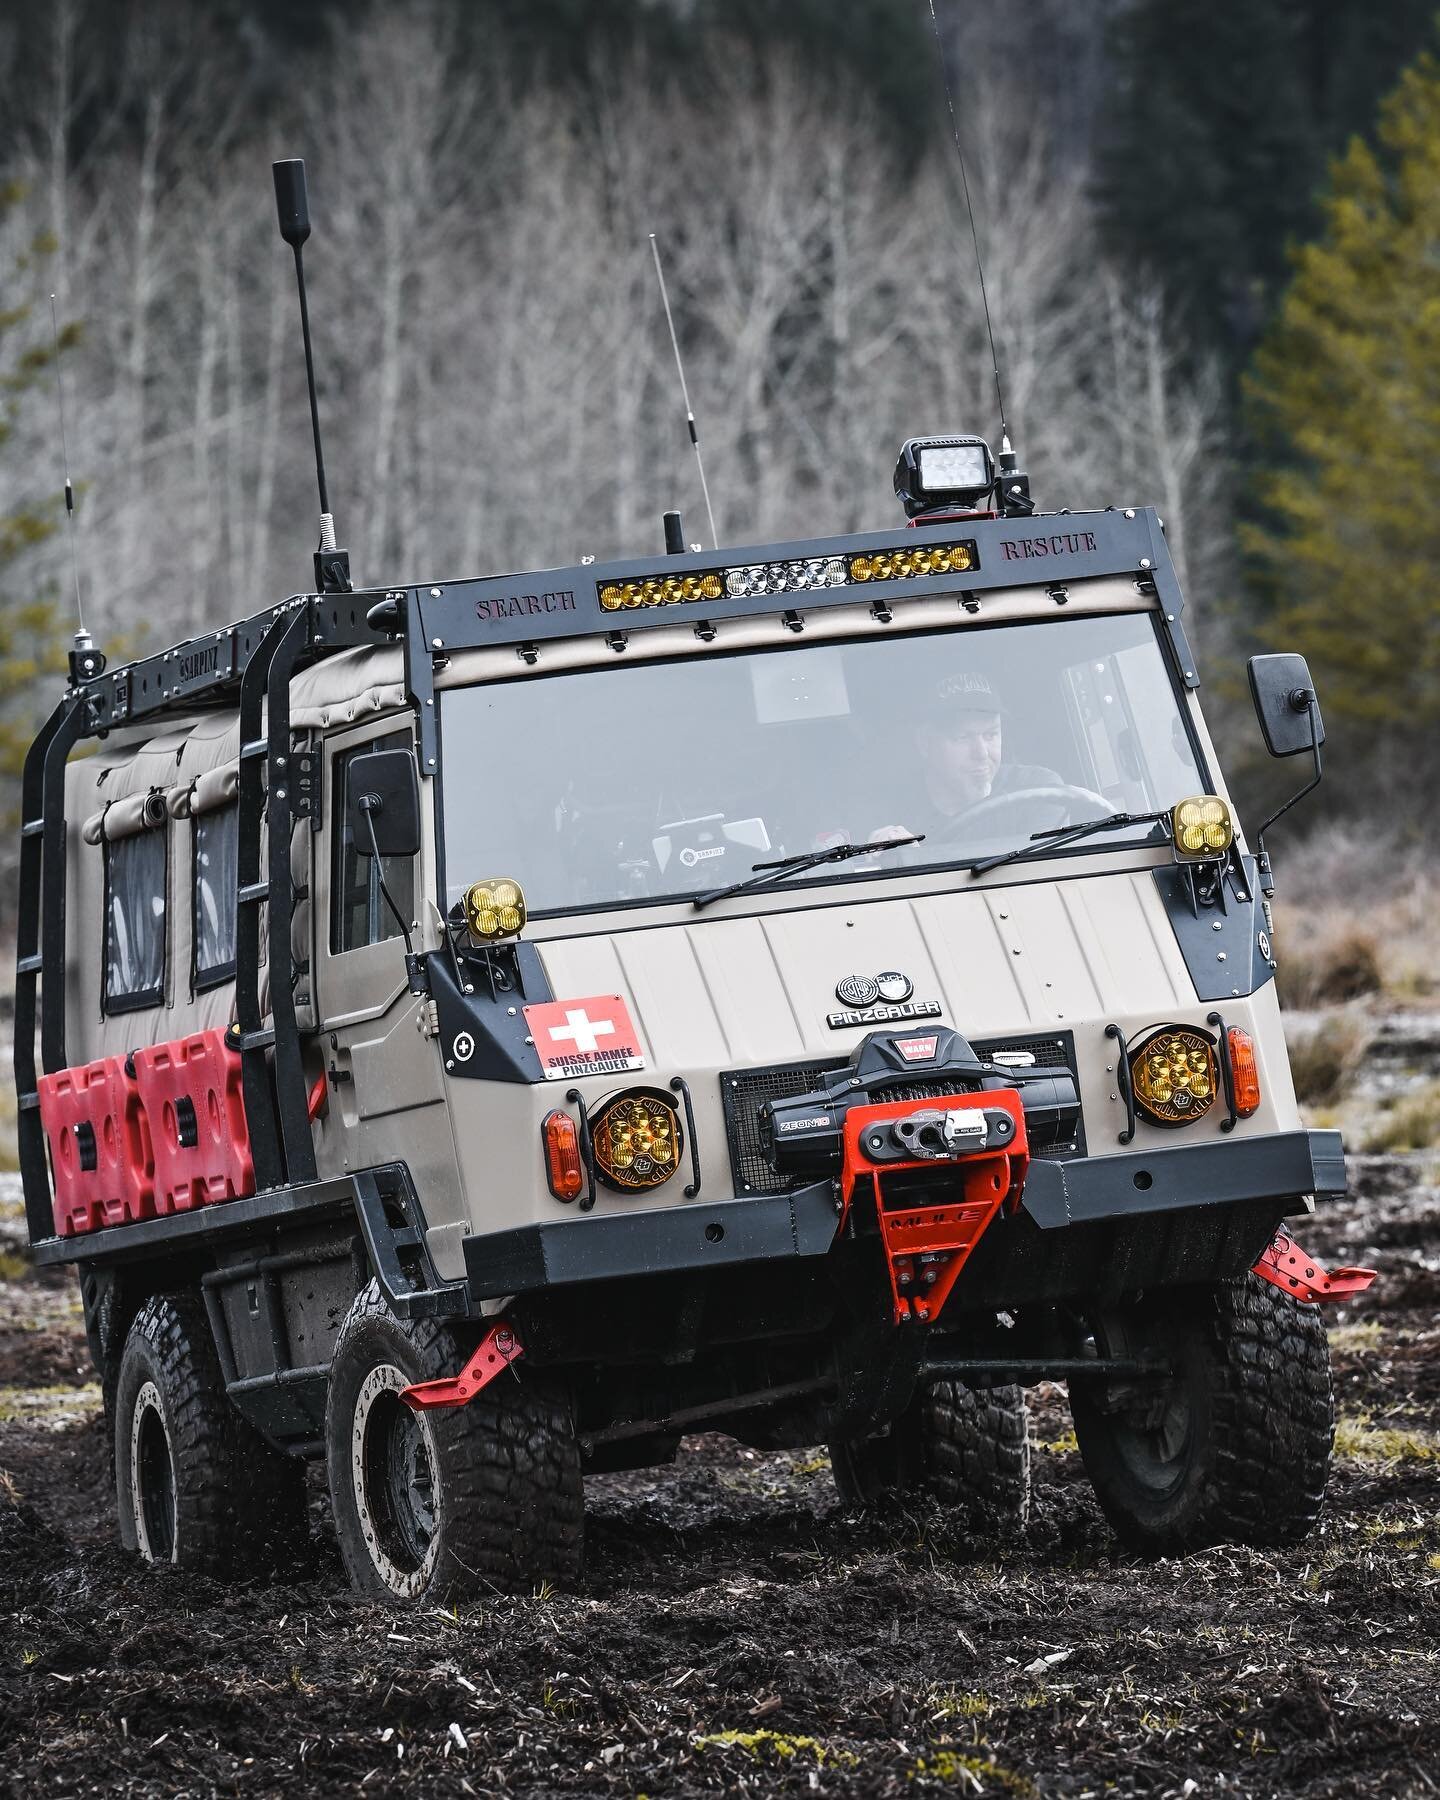 Never stop training, or learning..
 

&ldquo;Built to serve, that others may live.&rdquo;

___________________________

#searchandrescue #swissarmy #pinzgauer #4x4 #custom #offroad #overland #adventure #truck #builtnotbought #adventurerig #adventurea